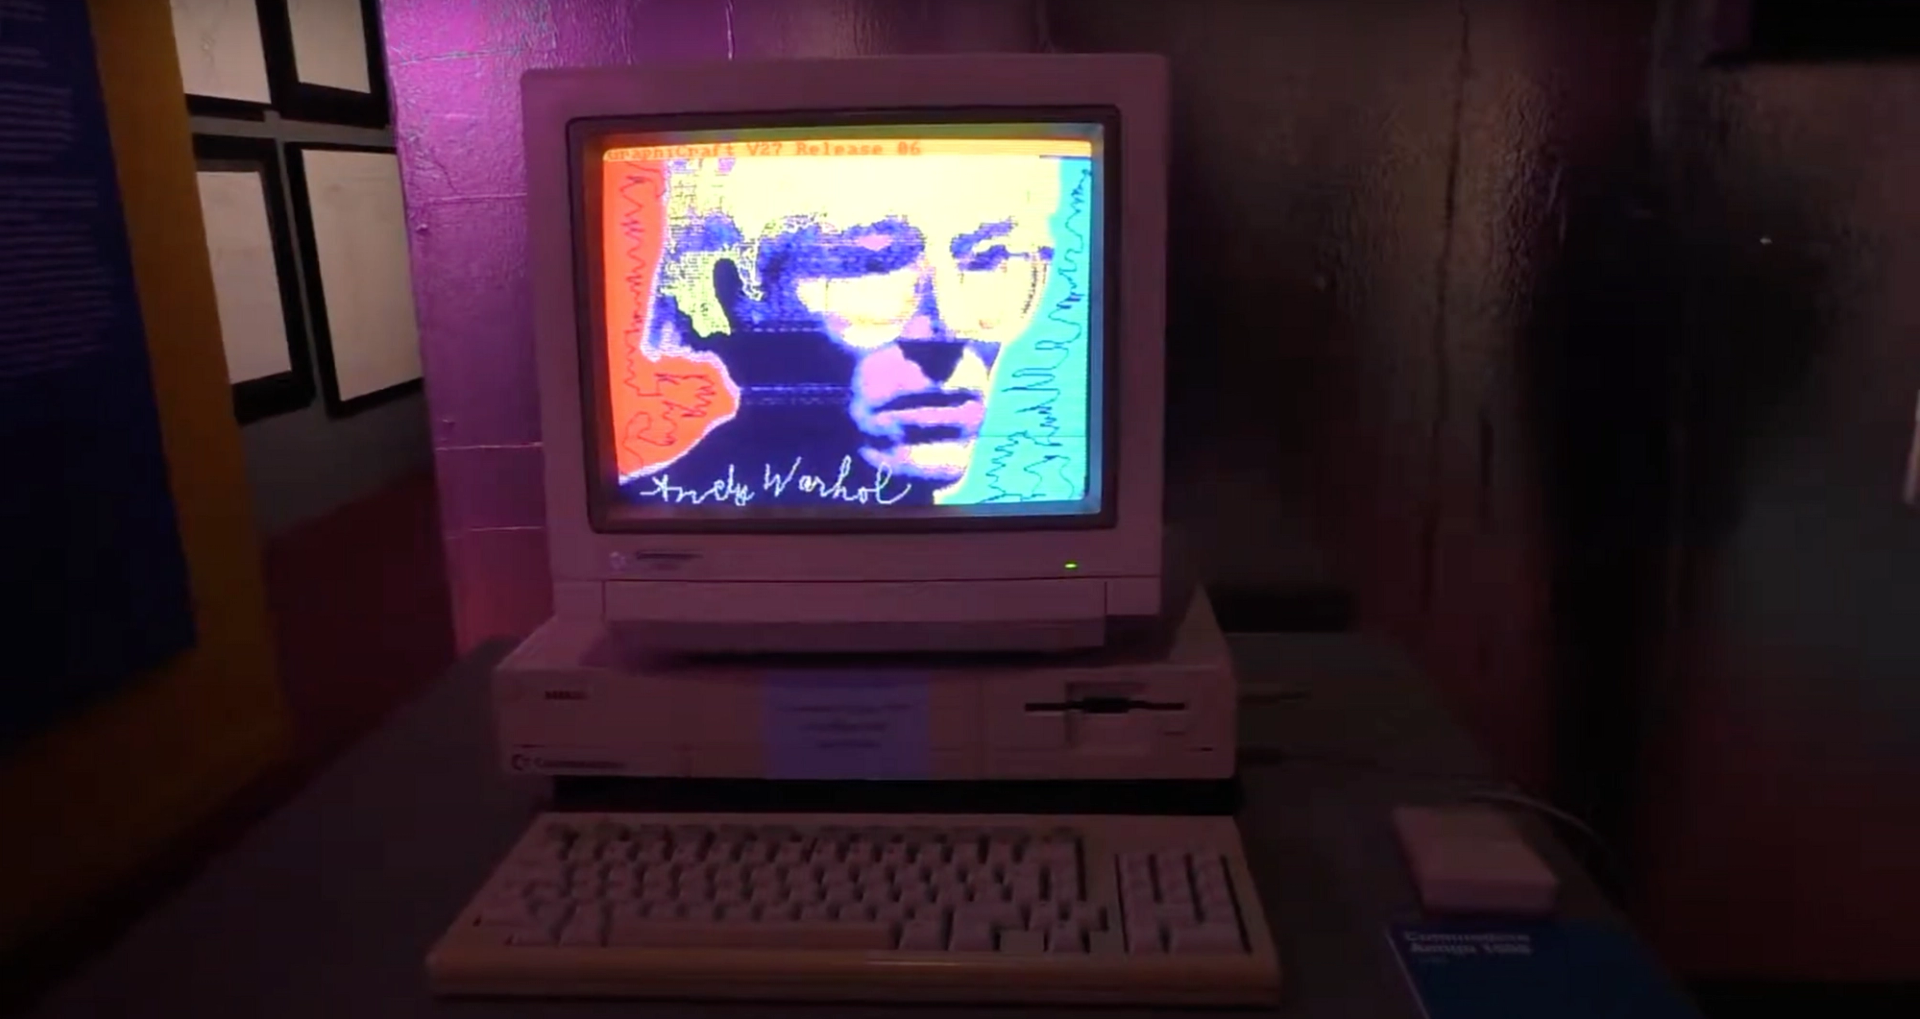 An installation view of Andy Warhol's Amiga 1000 Computer on show in Rome. An old-fashioned computer is shown displaying a digital self-portrait by artist Andy Warhol.